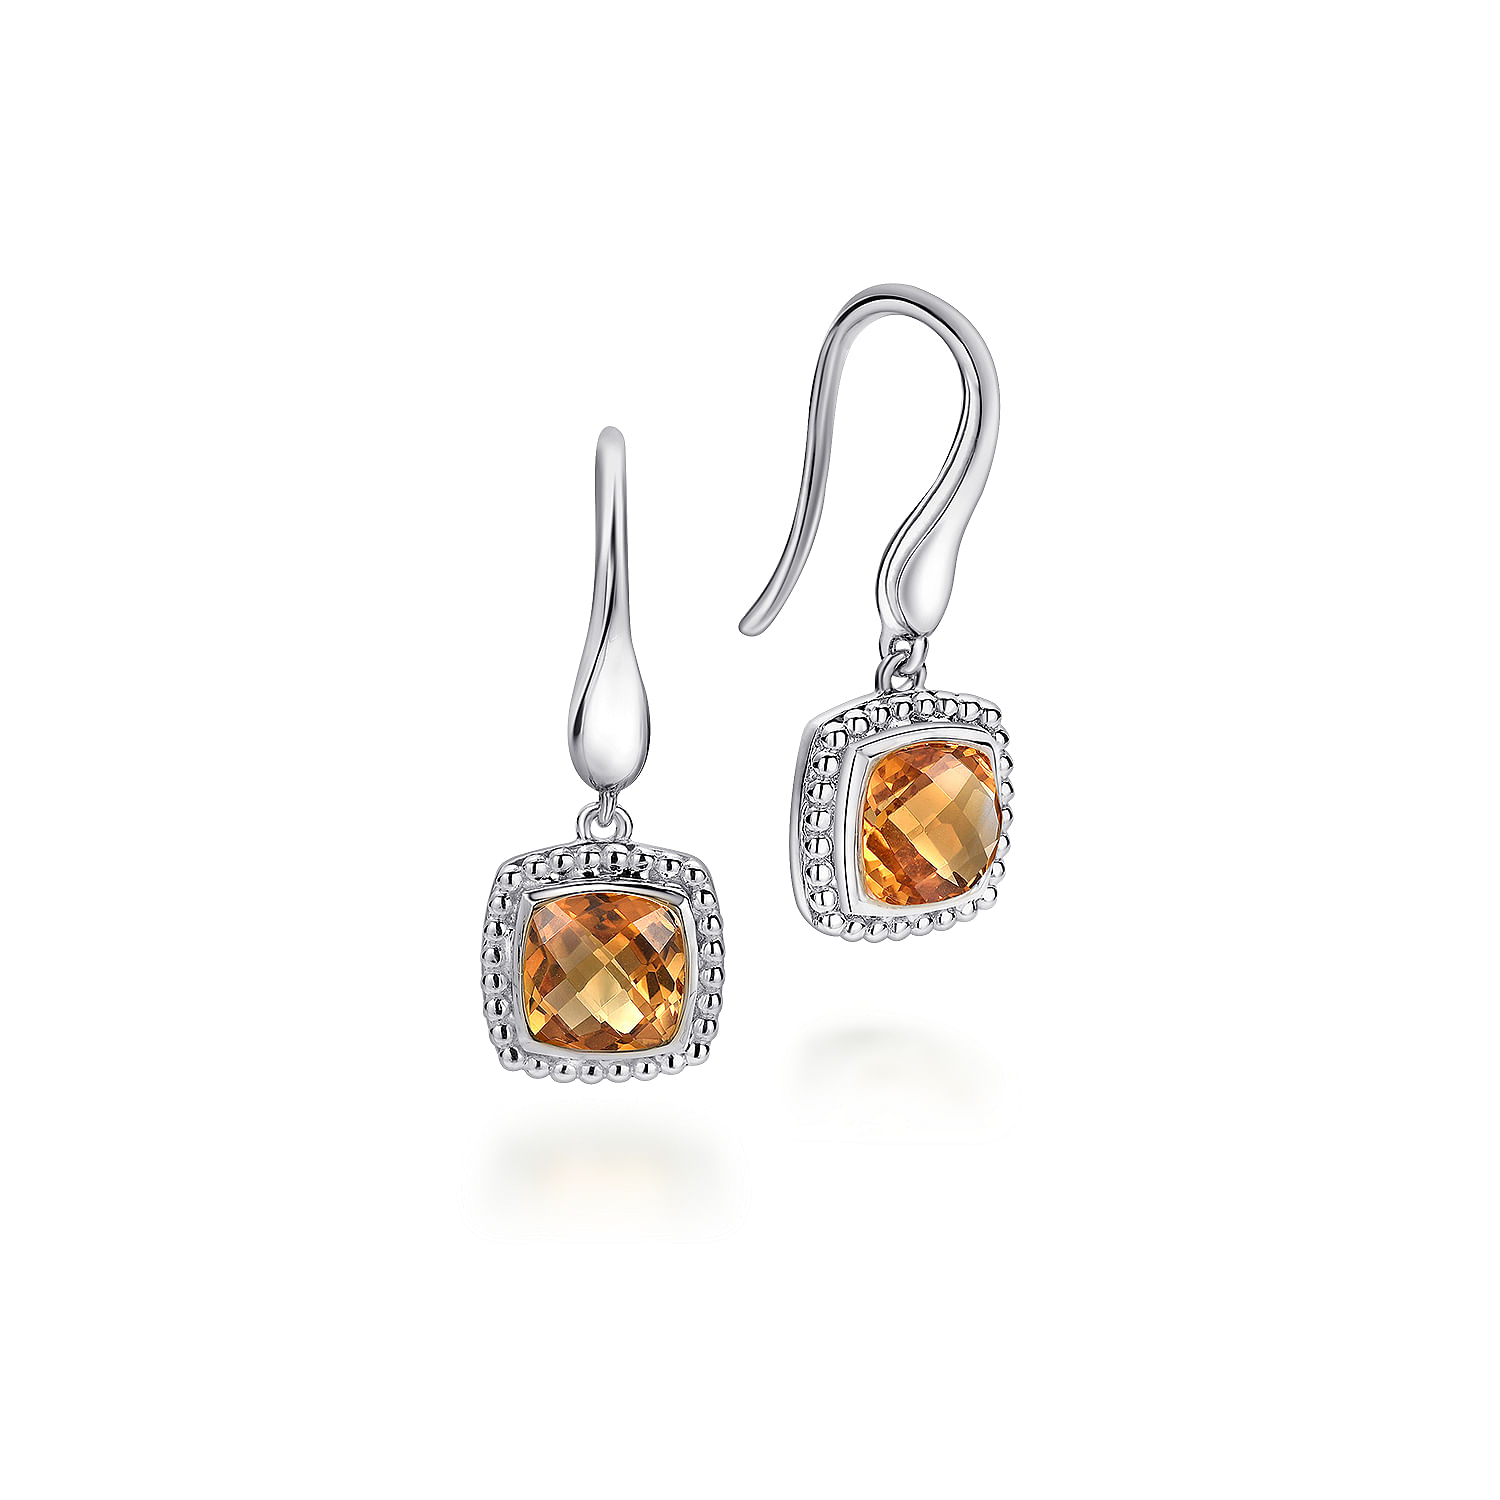 Sterling Silver Earrings with Cushion Cut Citrine Drops